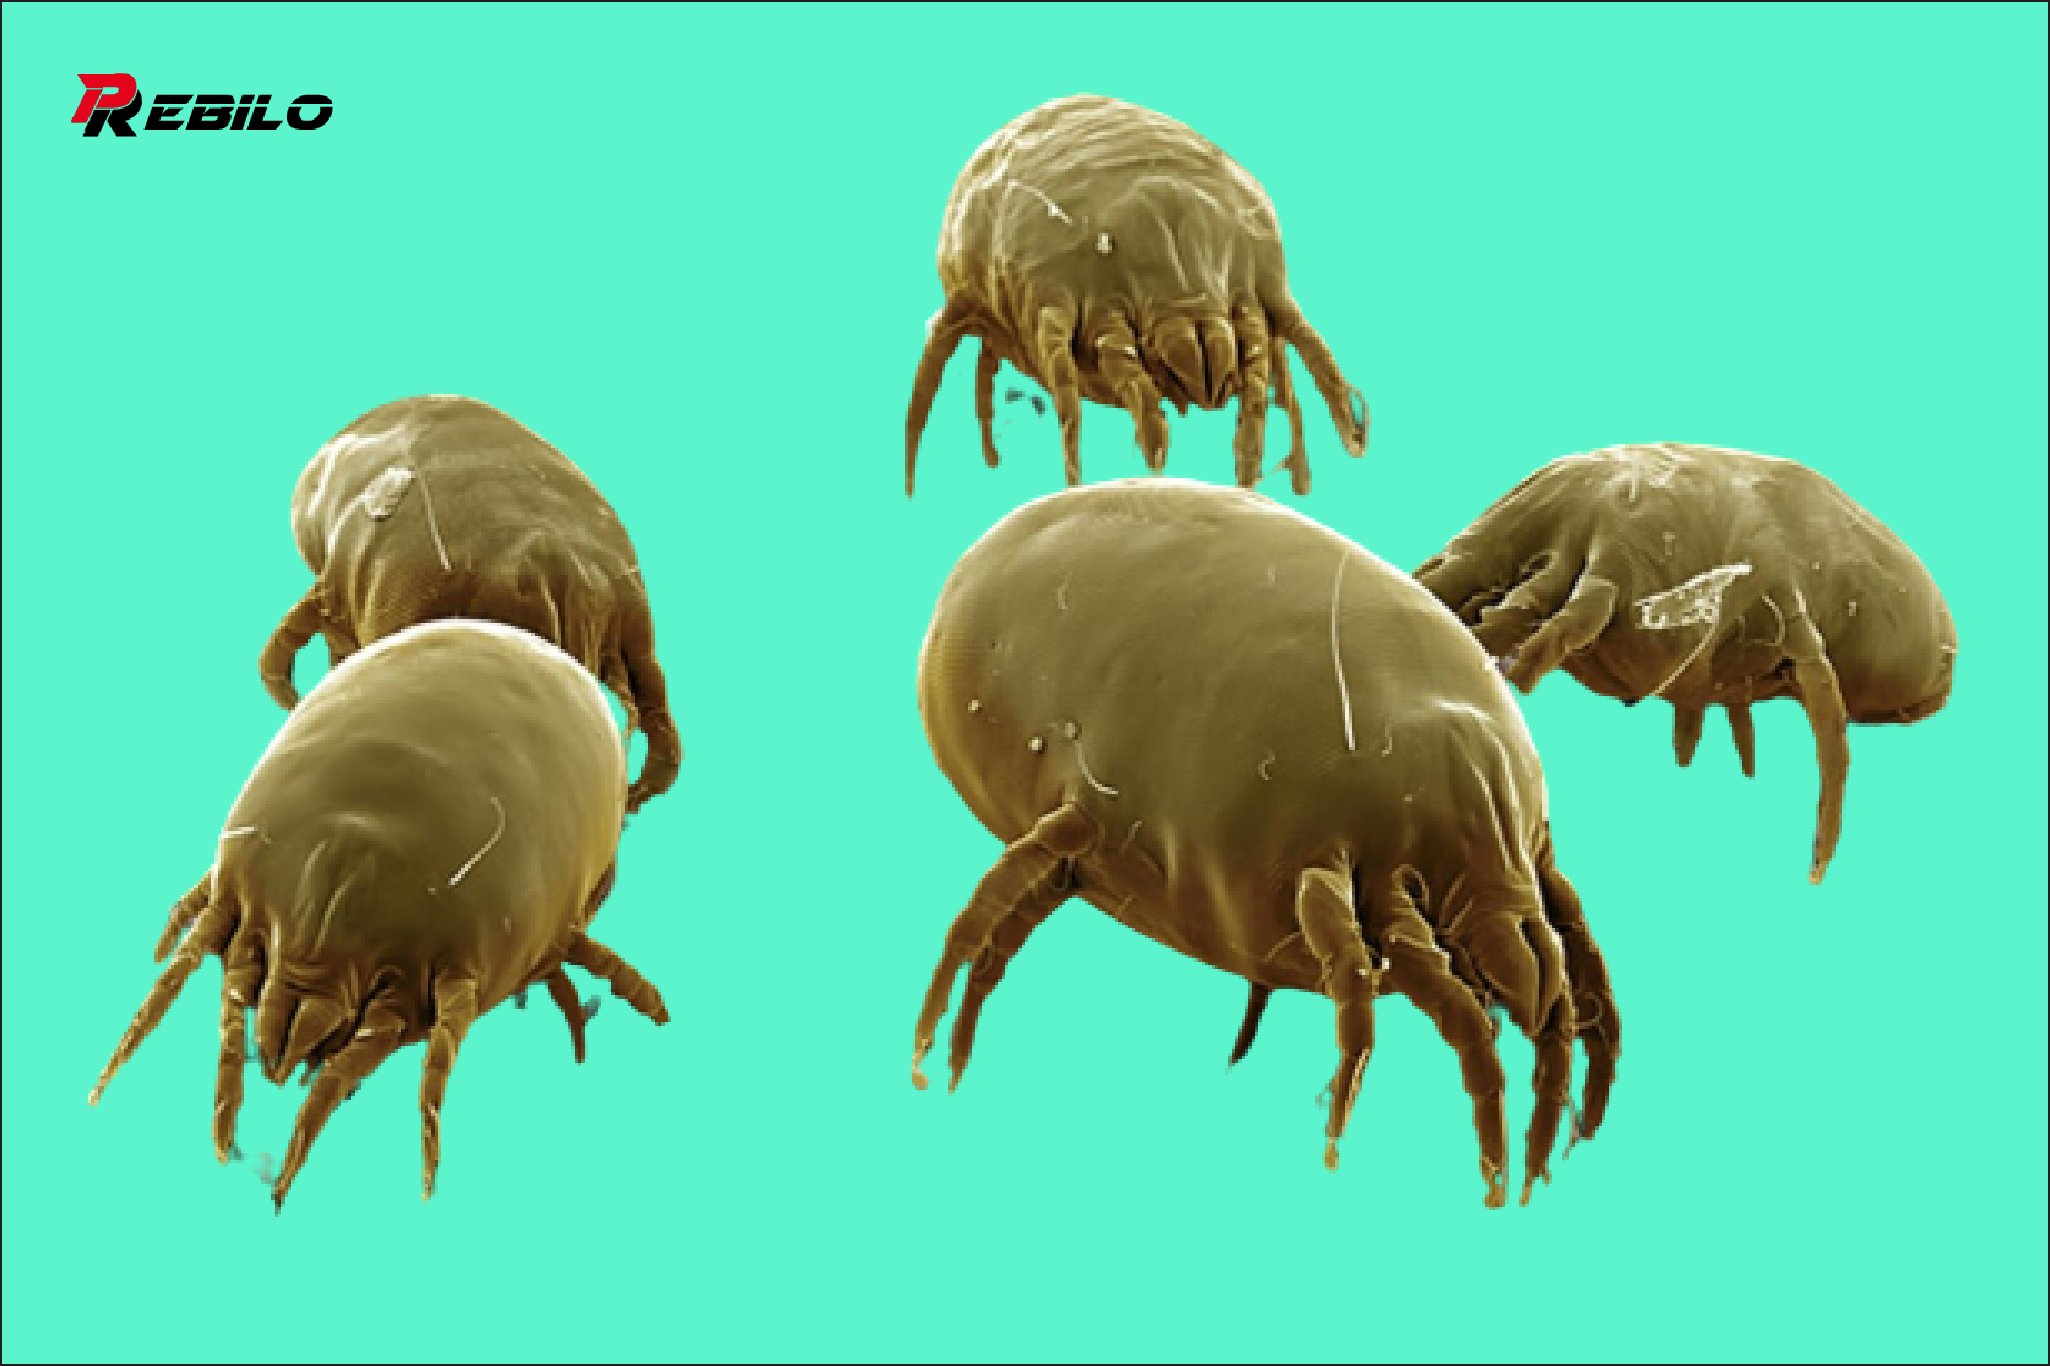 Did you know: Millions of dust mites live in your bed. And you can kill them in a second!